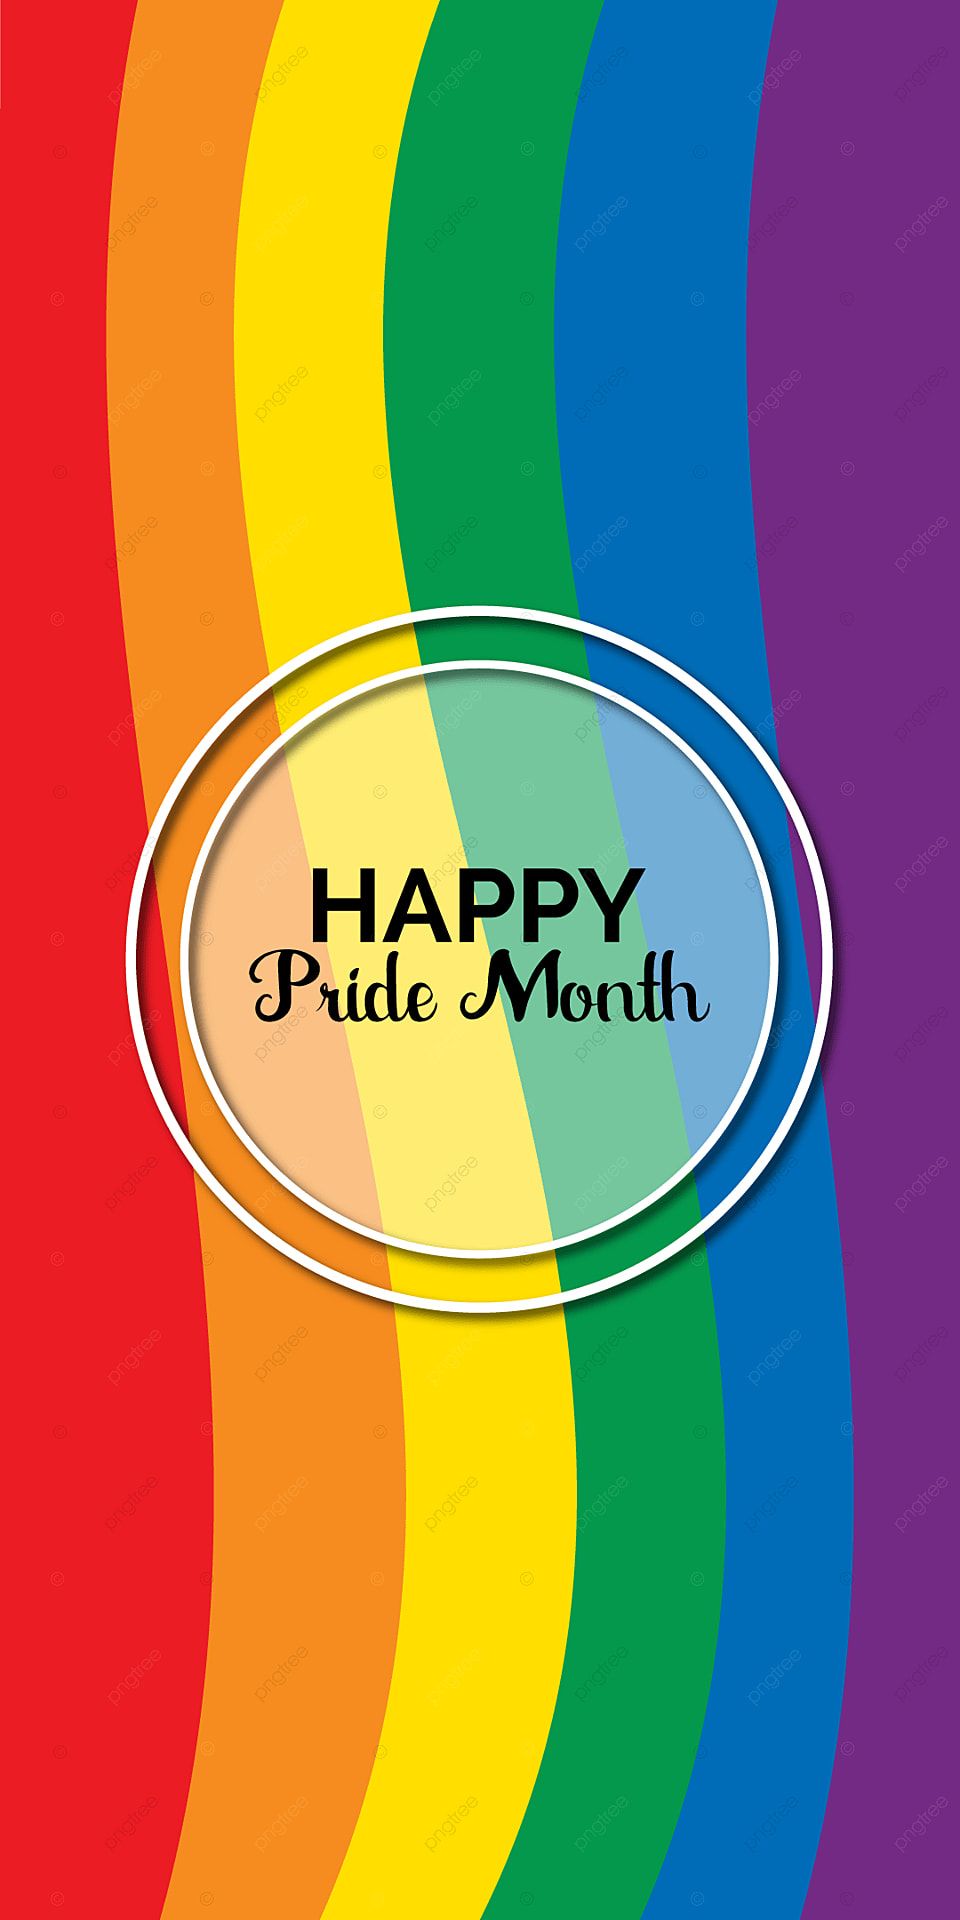 Happy Pride Month Mobile Phone Colorful Wallpaper Deaign, Design, Gay, Pride Background Image for Free Download